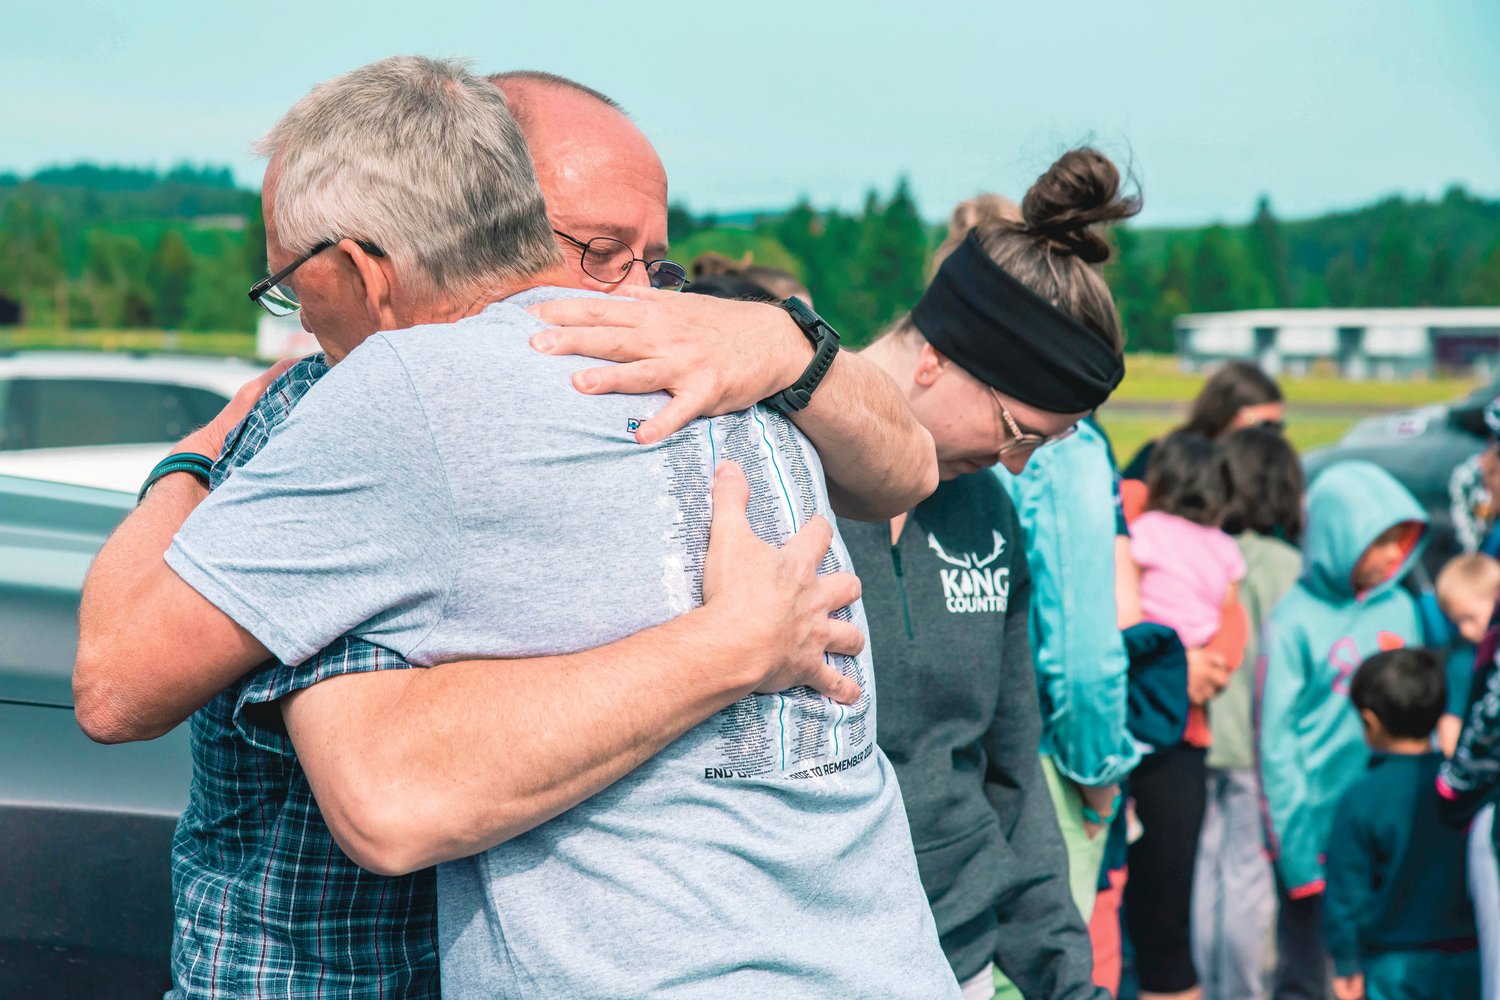 Glenn Schaffer, father of trooper Justin R. Schaffer, embraces a visitor during the Beyond the Call of Duty Ride to Remember 2020 that stopped by the Chehalis Washington State Patrol office in his honor on Sunday.